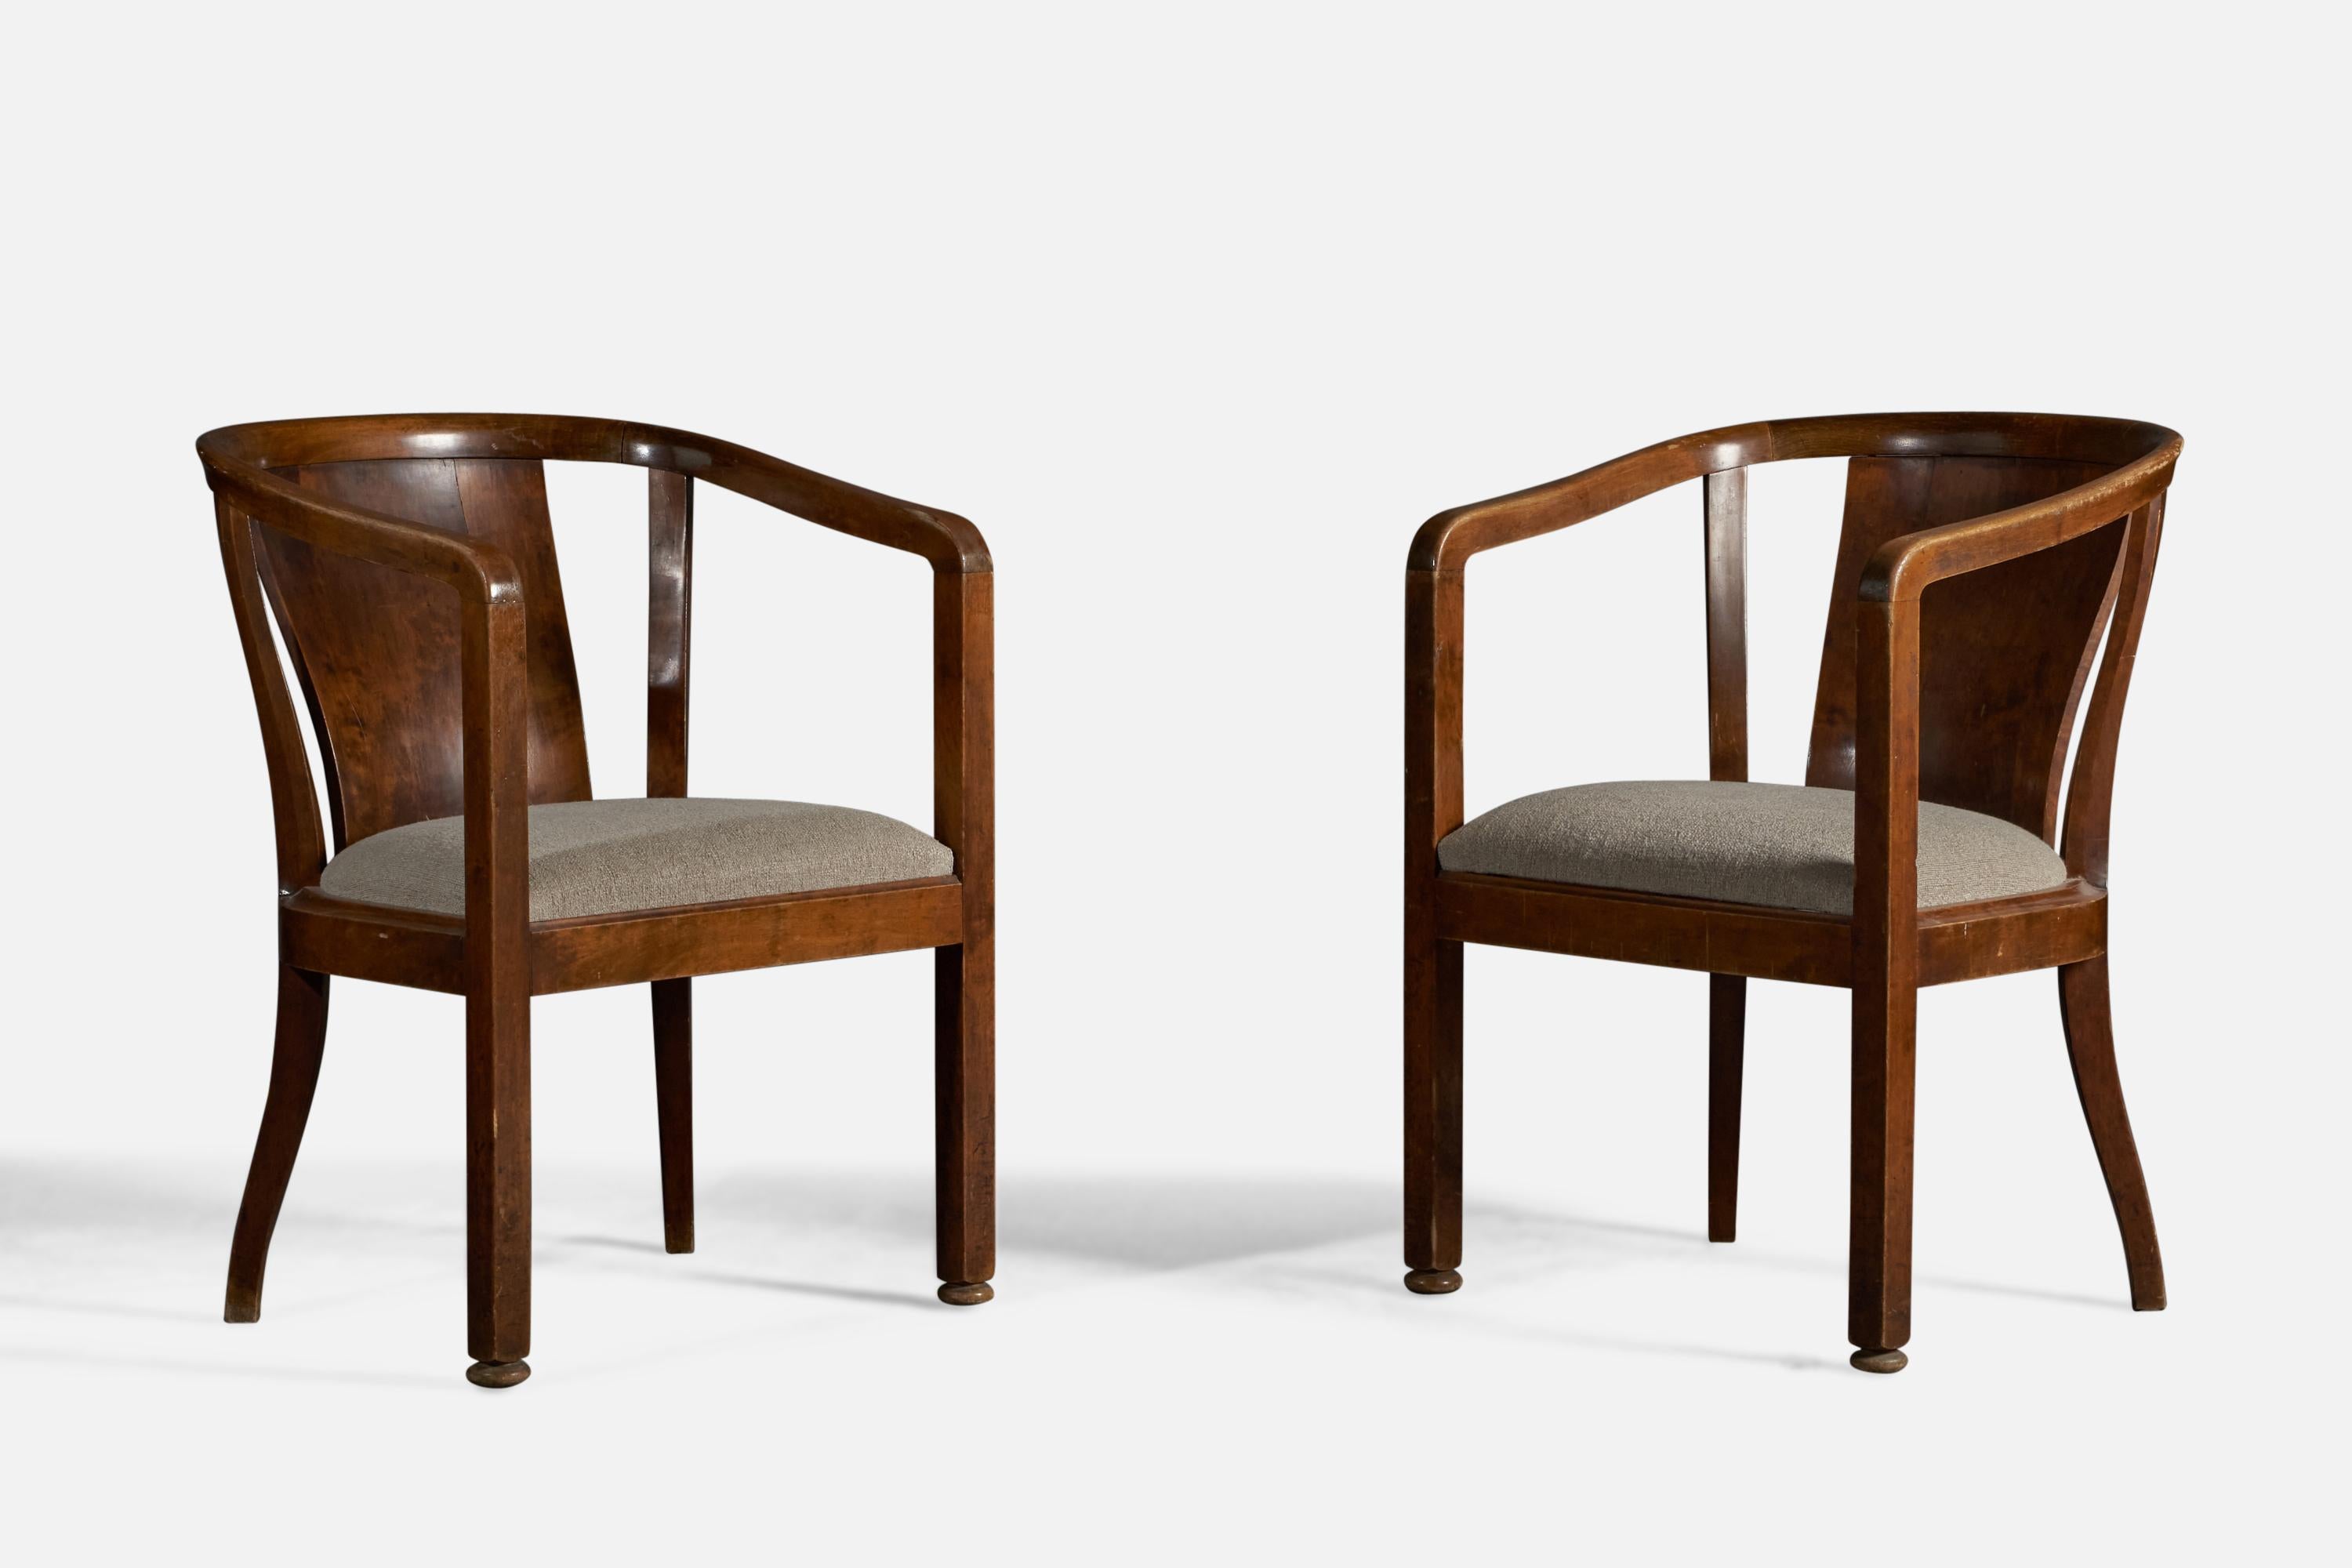 A pair of stained birch and beige fabric, designed and produced by Nordiska Kompaniet for the head office of Systembolaget, Sweden, 1919.

19” seat height